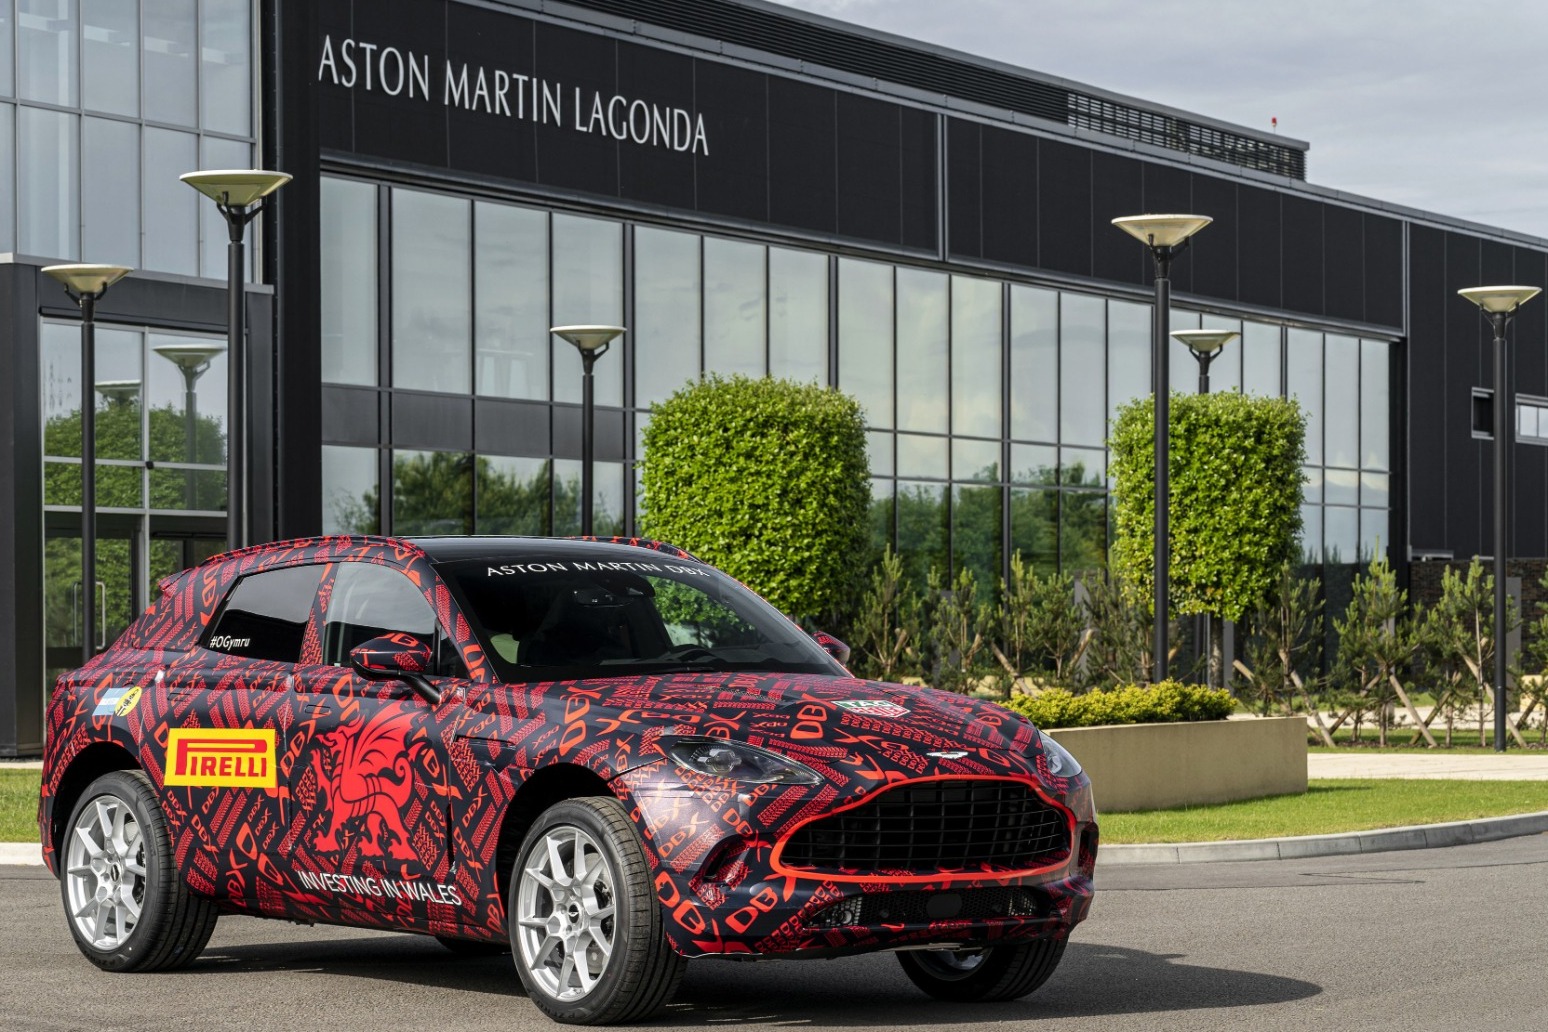 Aston Martin announces ambitious sustainability strategy to be net-zero by 2030 